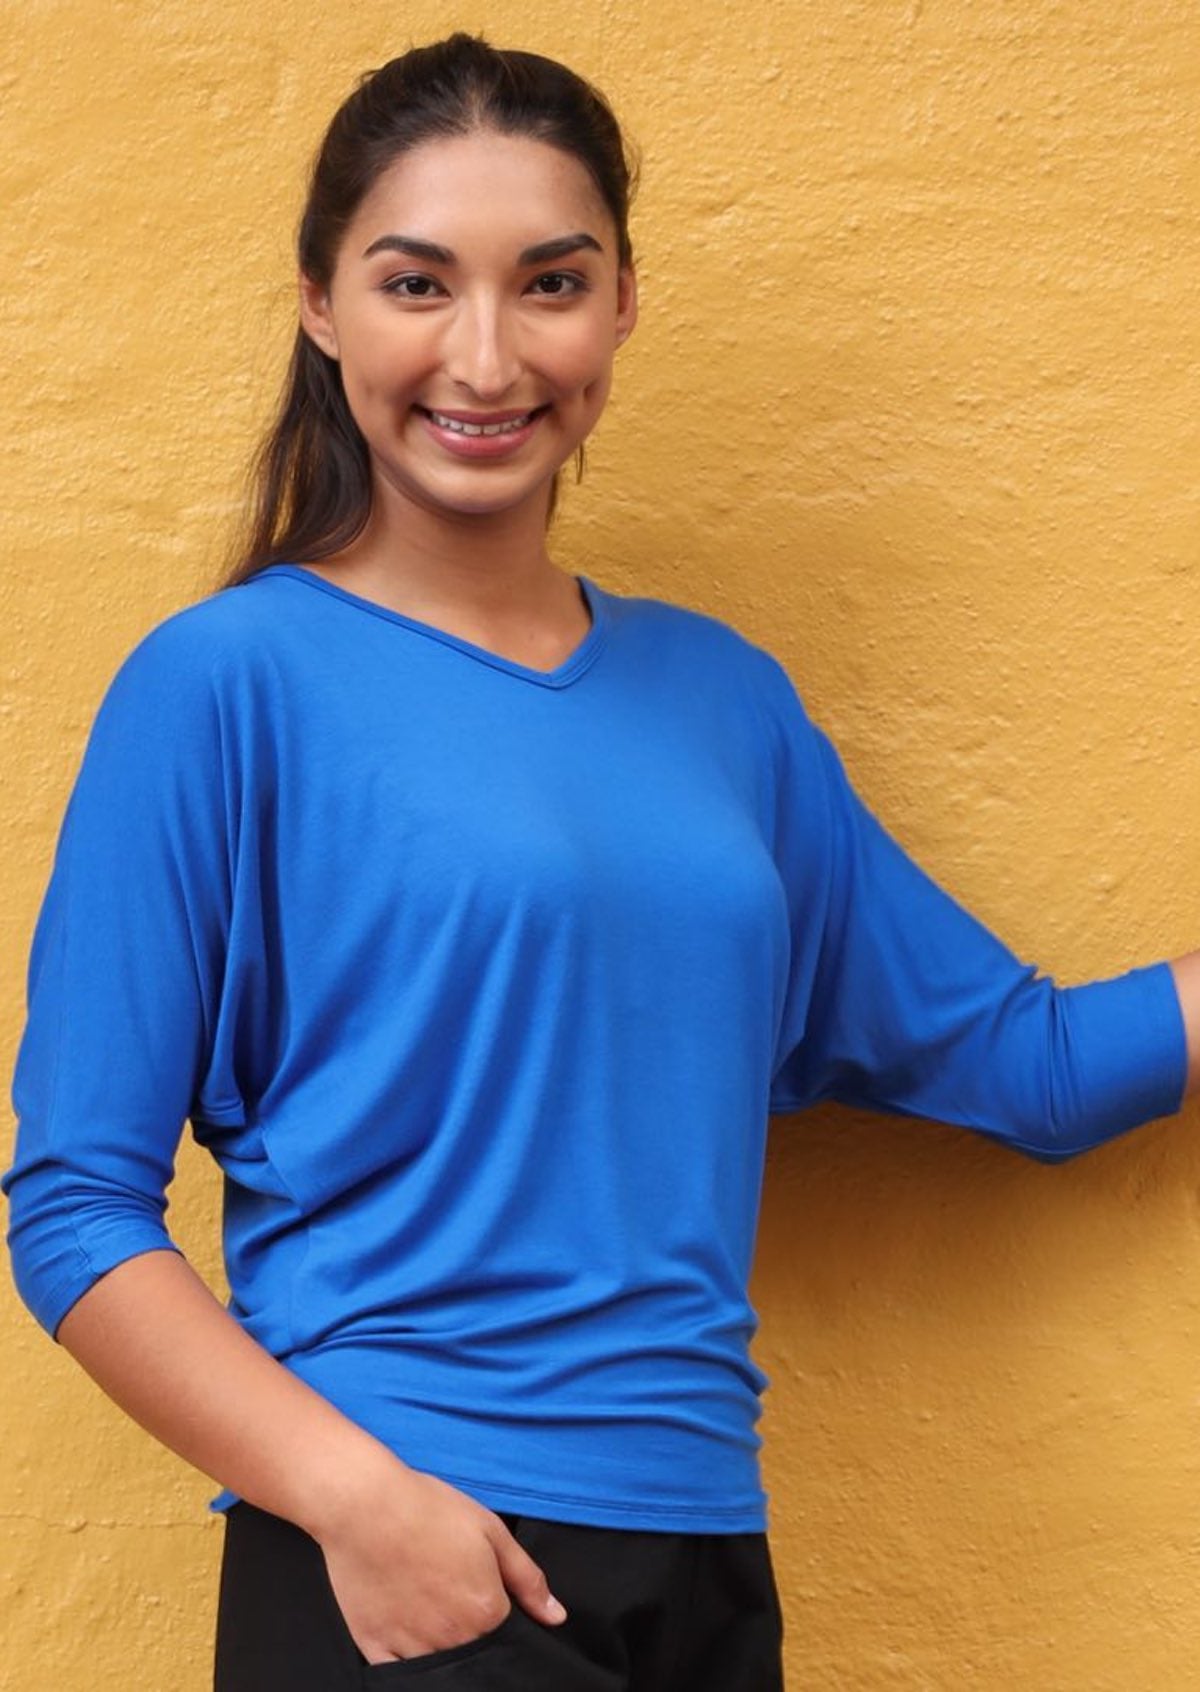 Woman wearing a 3/4 sleeve rayon batwing v-neck blue top in front of orange wall.